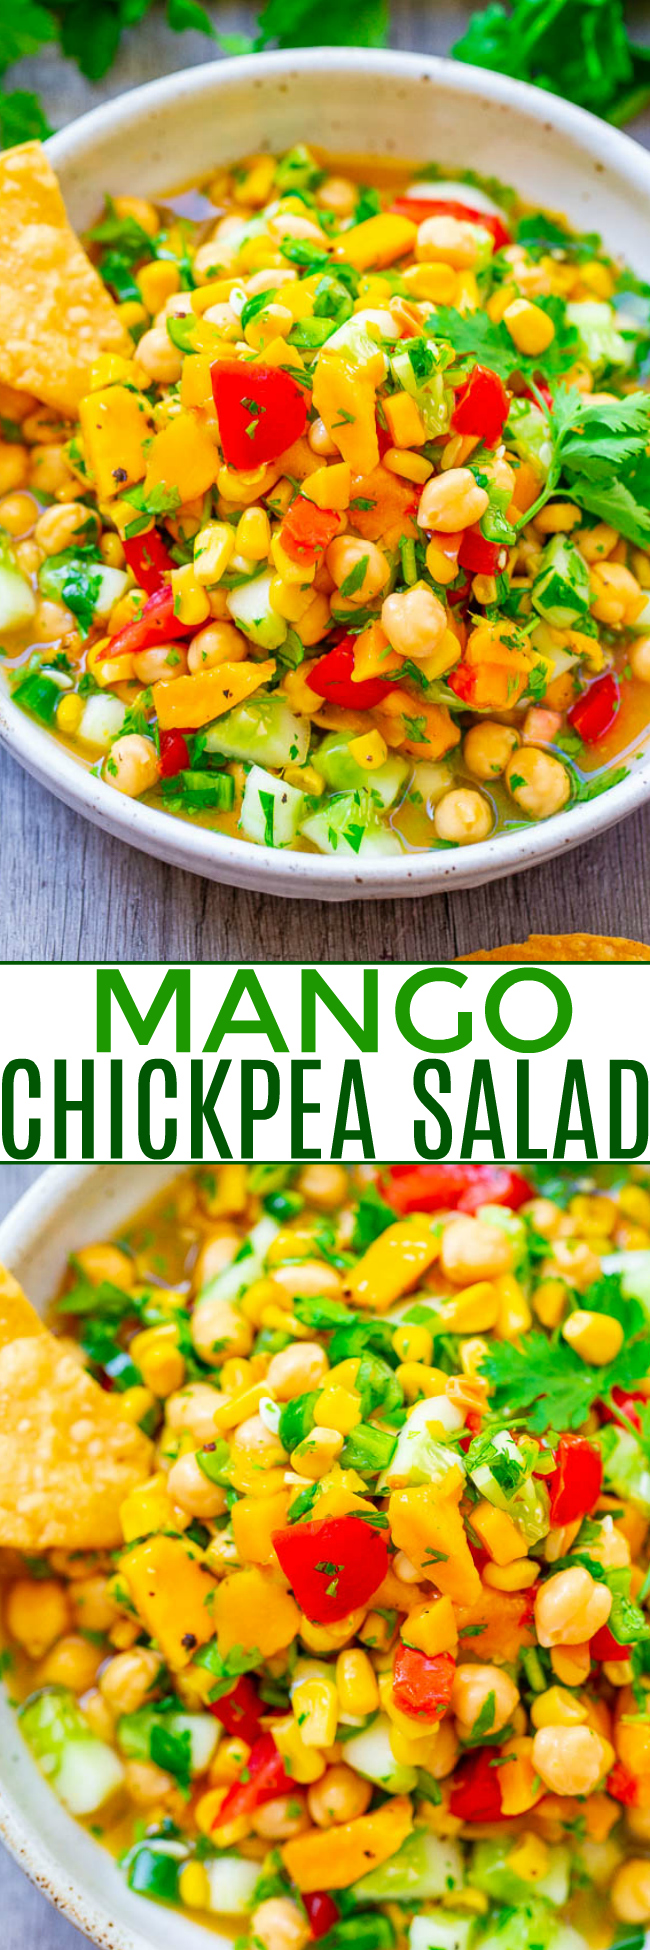 Mango Chickpea Corn Salad — An EASY salad that's ready in 5 minutes, HEALTHY, and full of Mexican-inspired flavors!! Great as a meatless lunch, dinner side dish, or for picnics and potlucks!!